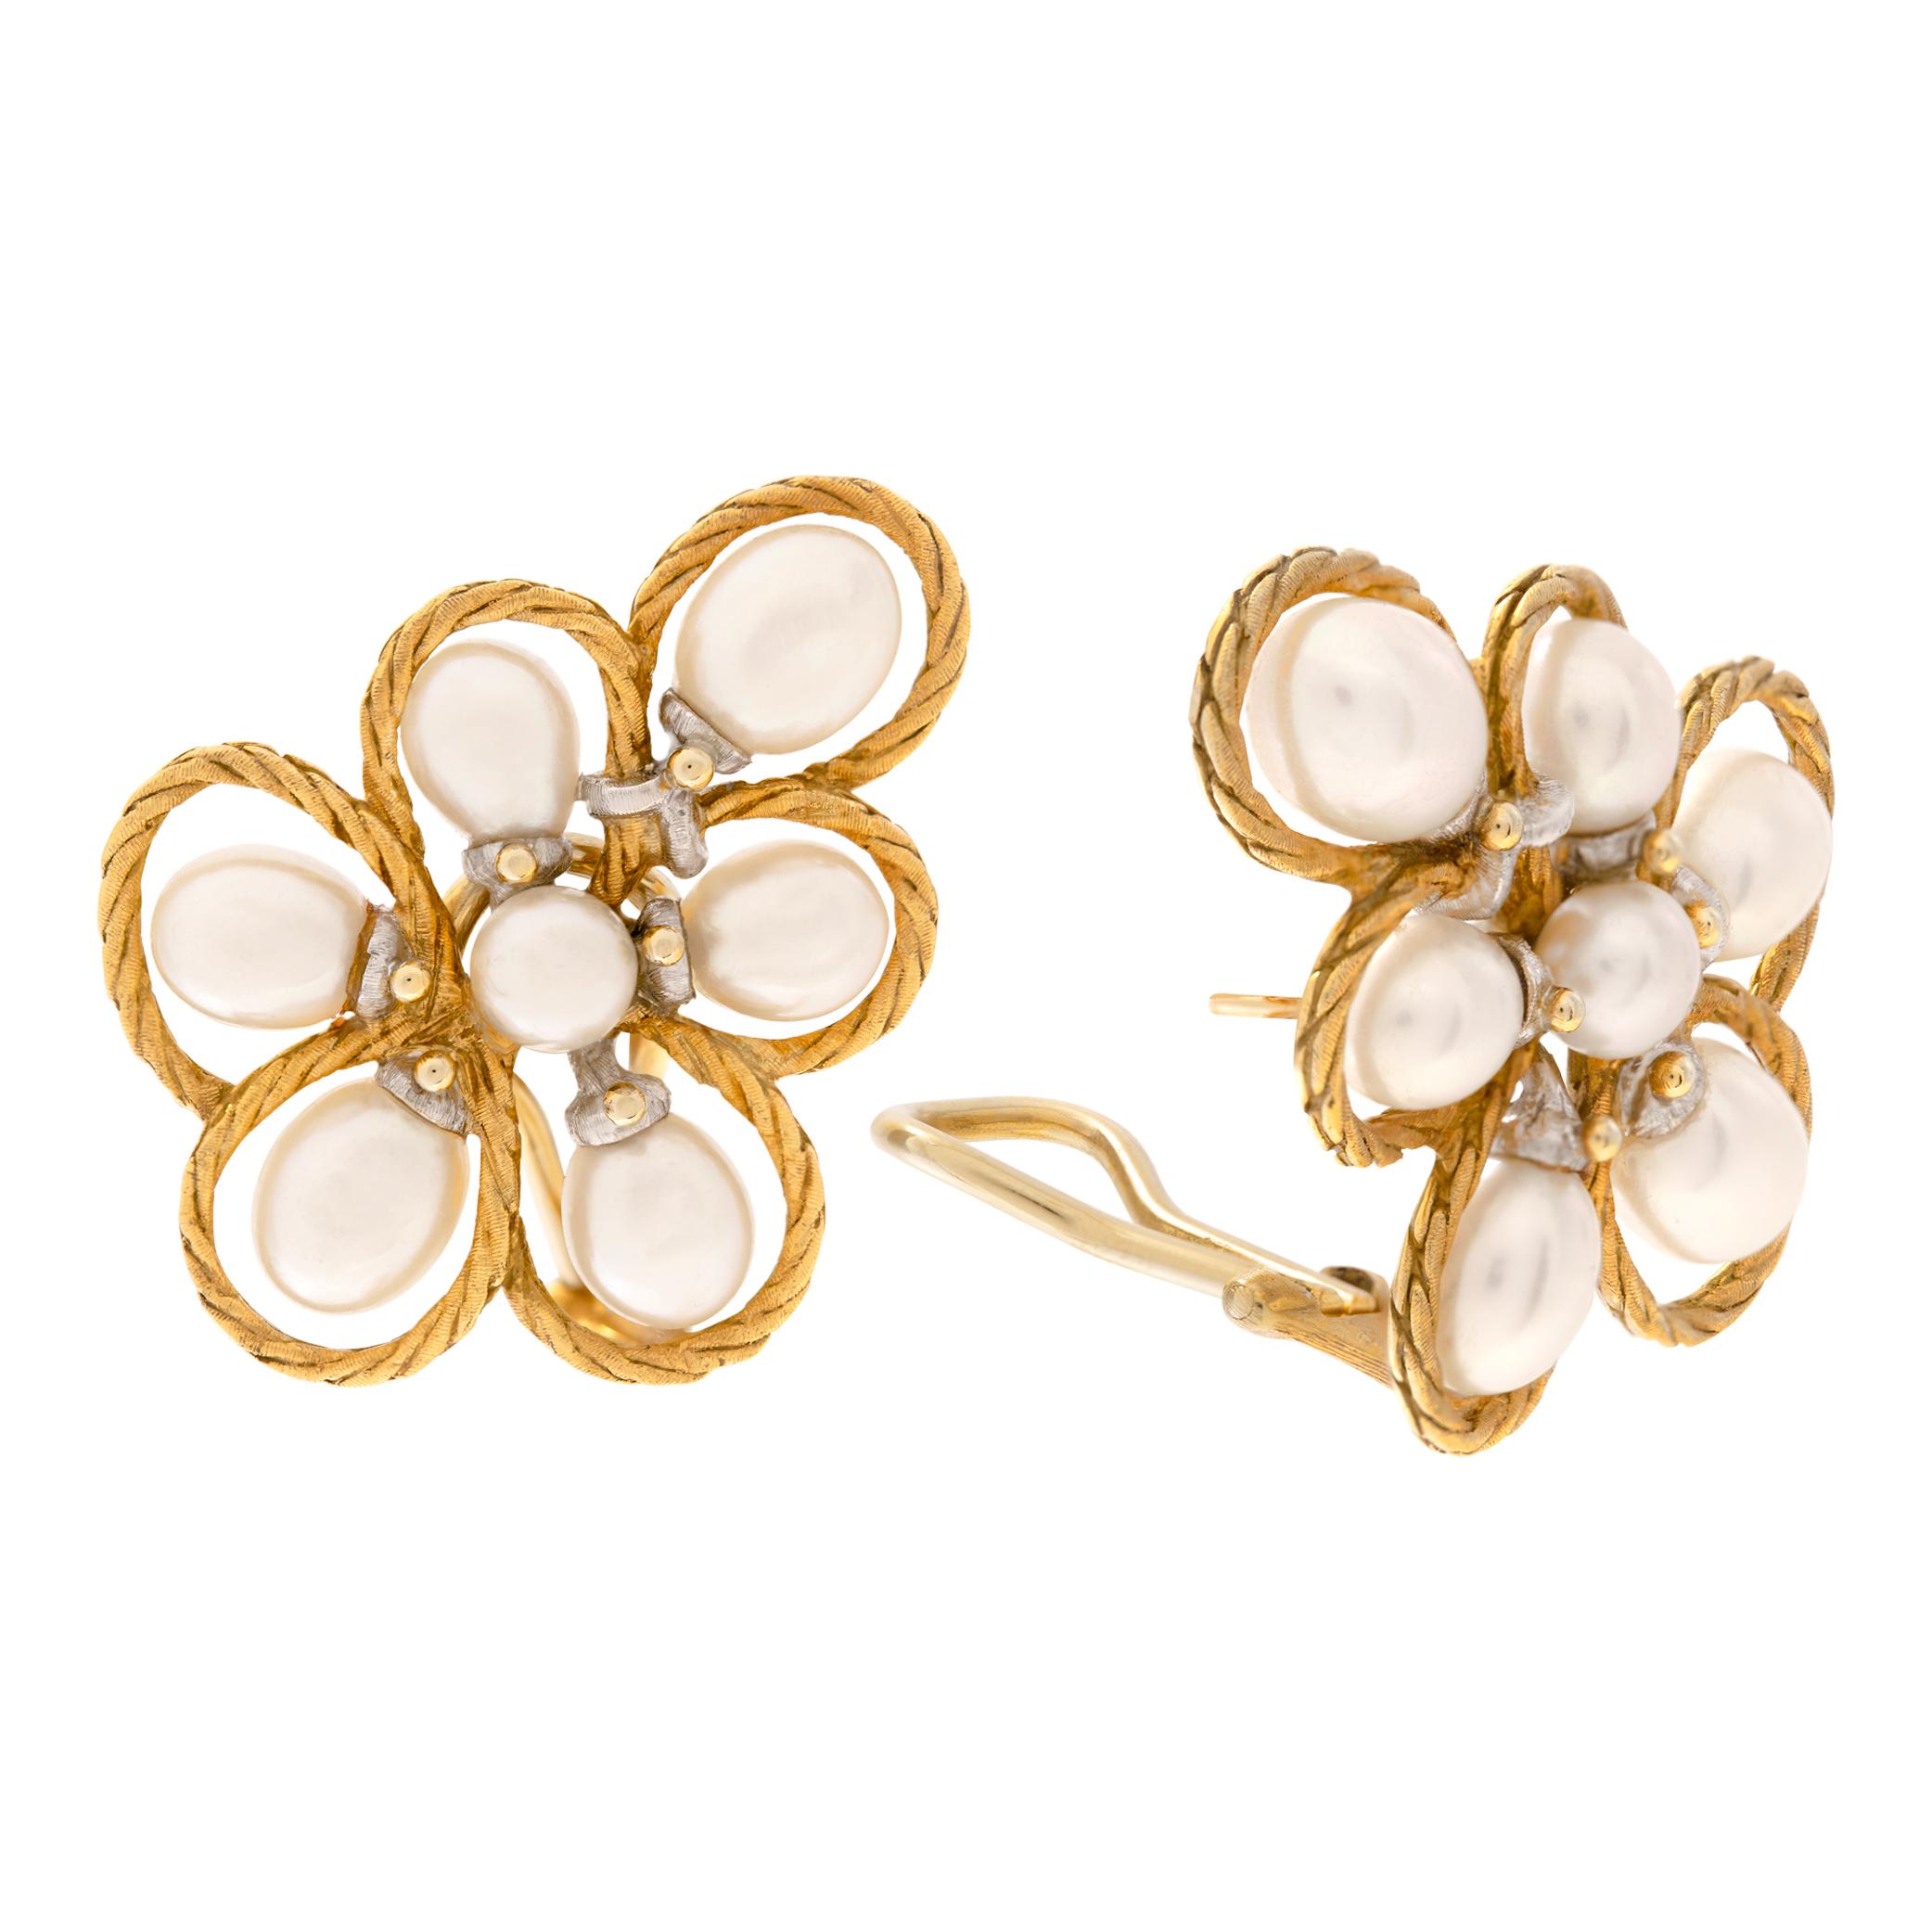 Floral style 18k yellow and white gold twisted rope framed pearl earings with omega clip backs. Measure 35mm x 27mm.
